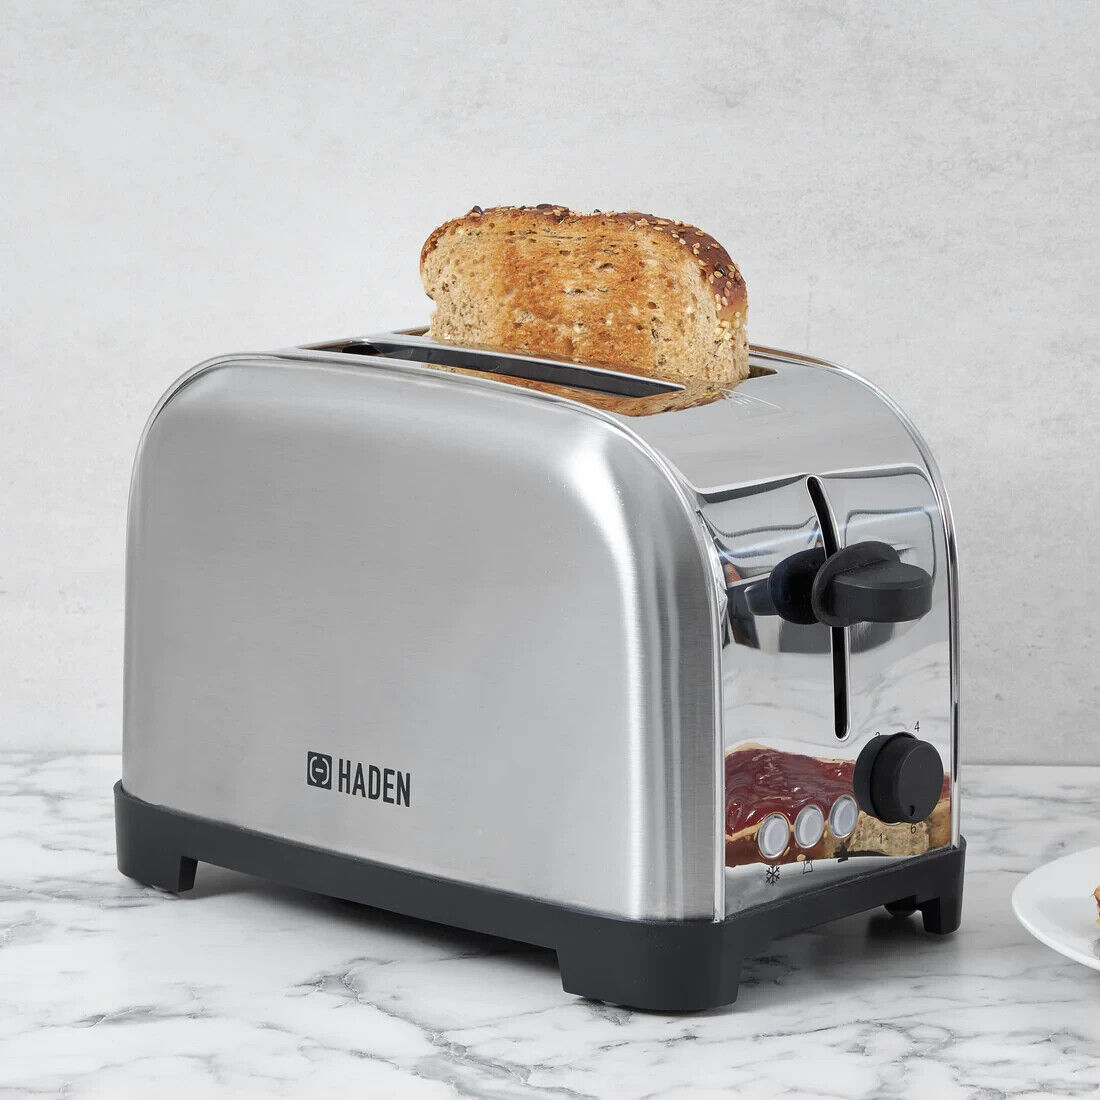 Haden Iver Electric Stainless Steel 2 Slice Toaster (206466)